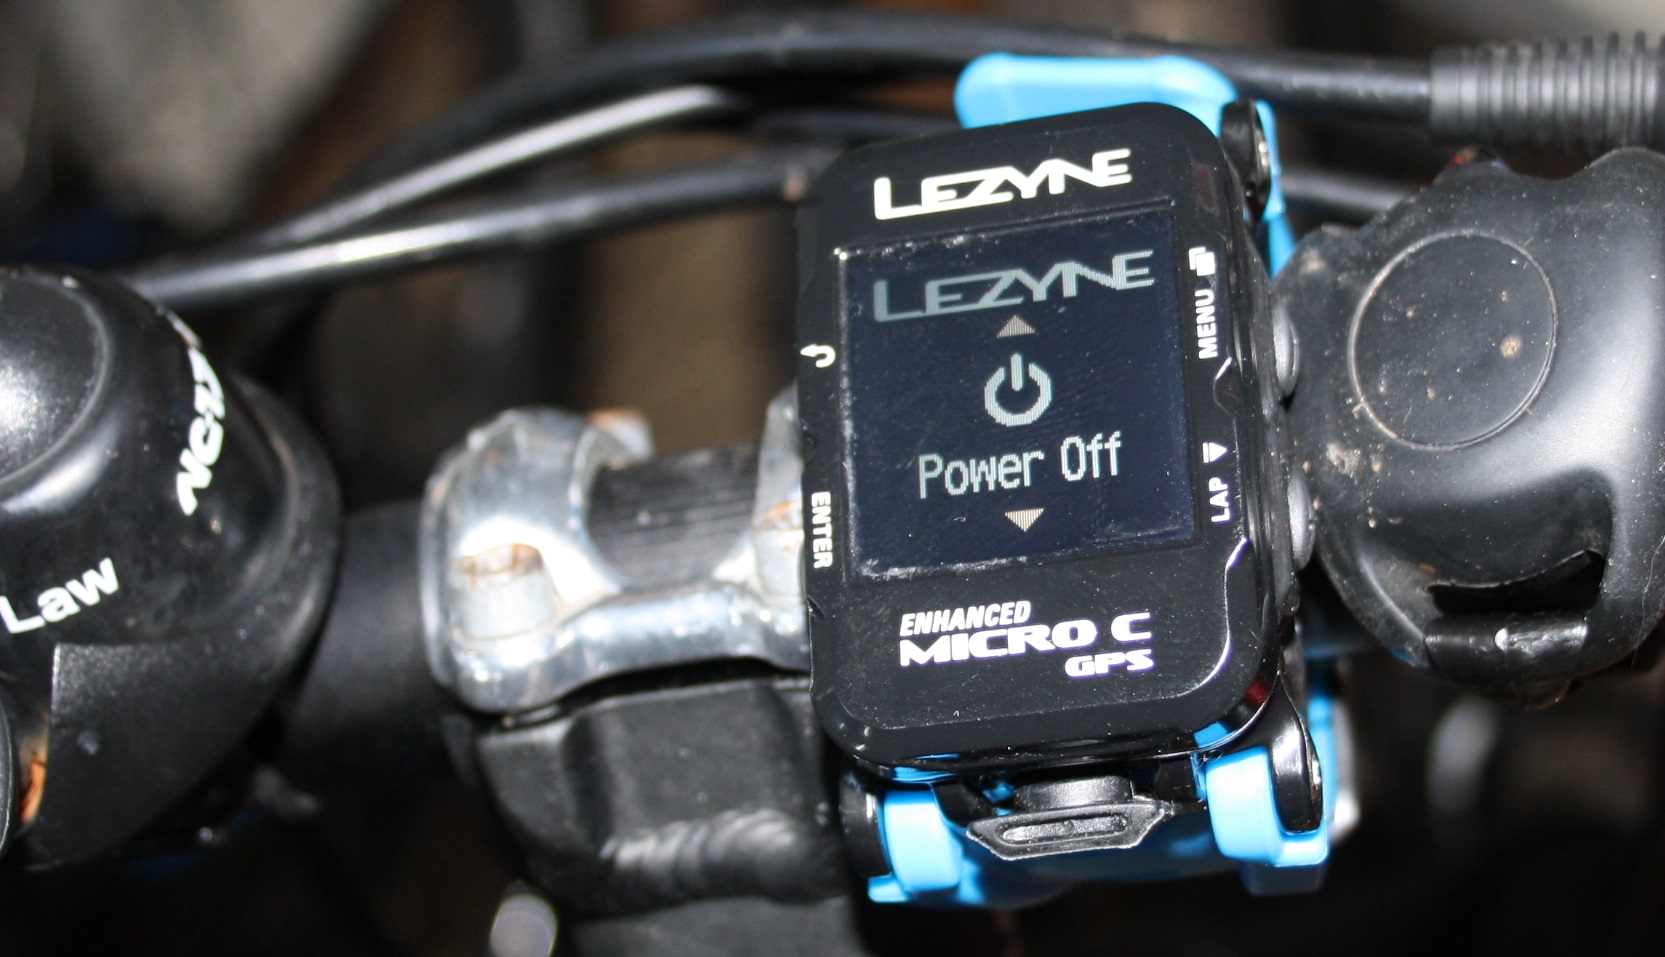 Lezyne Micro Watch Review Additional Coverage of C, GPS, Macro 